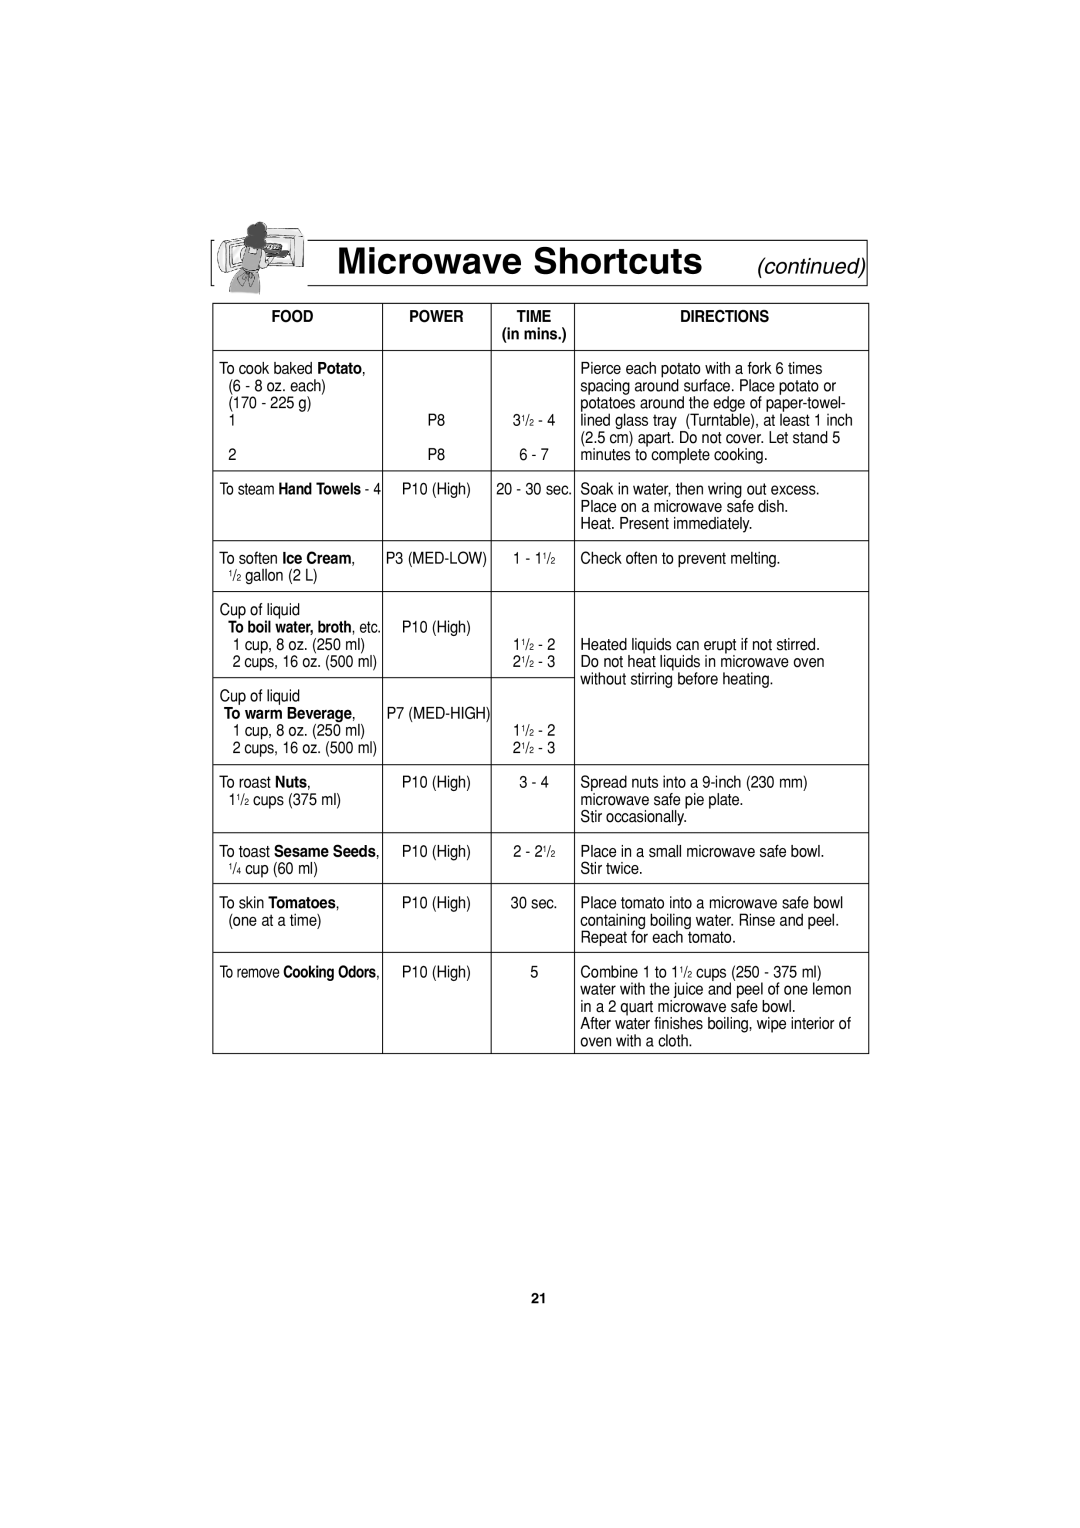 Panasonic NN-S963, NN-S763, NN-T763 Microwave Shortcuts, continued, Food, Directions, To warm Beverage 